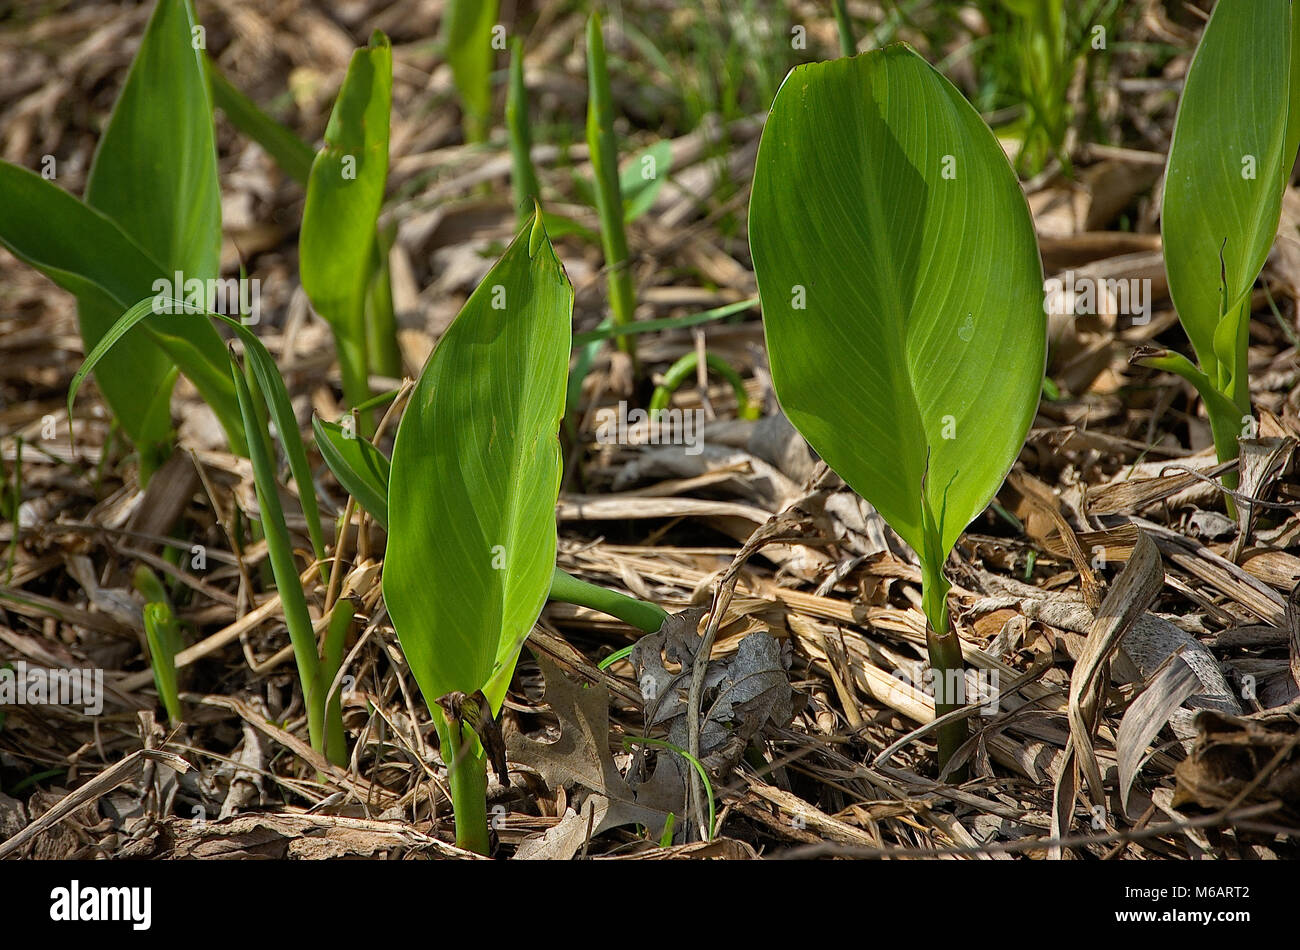 New canna lilly plants sprouting from a mulched flower bed Stock Photo